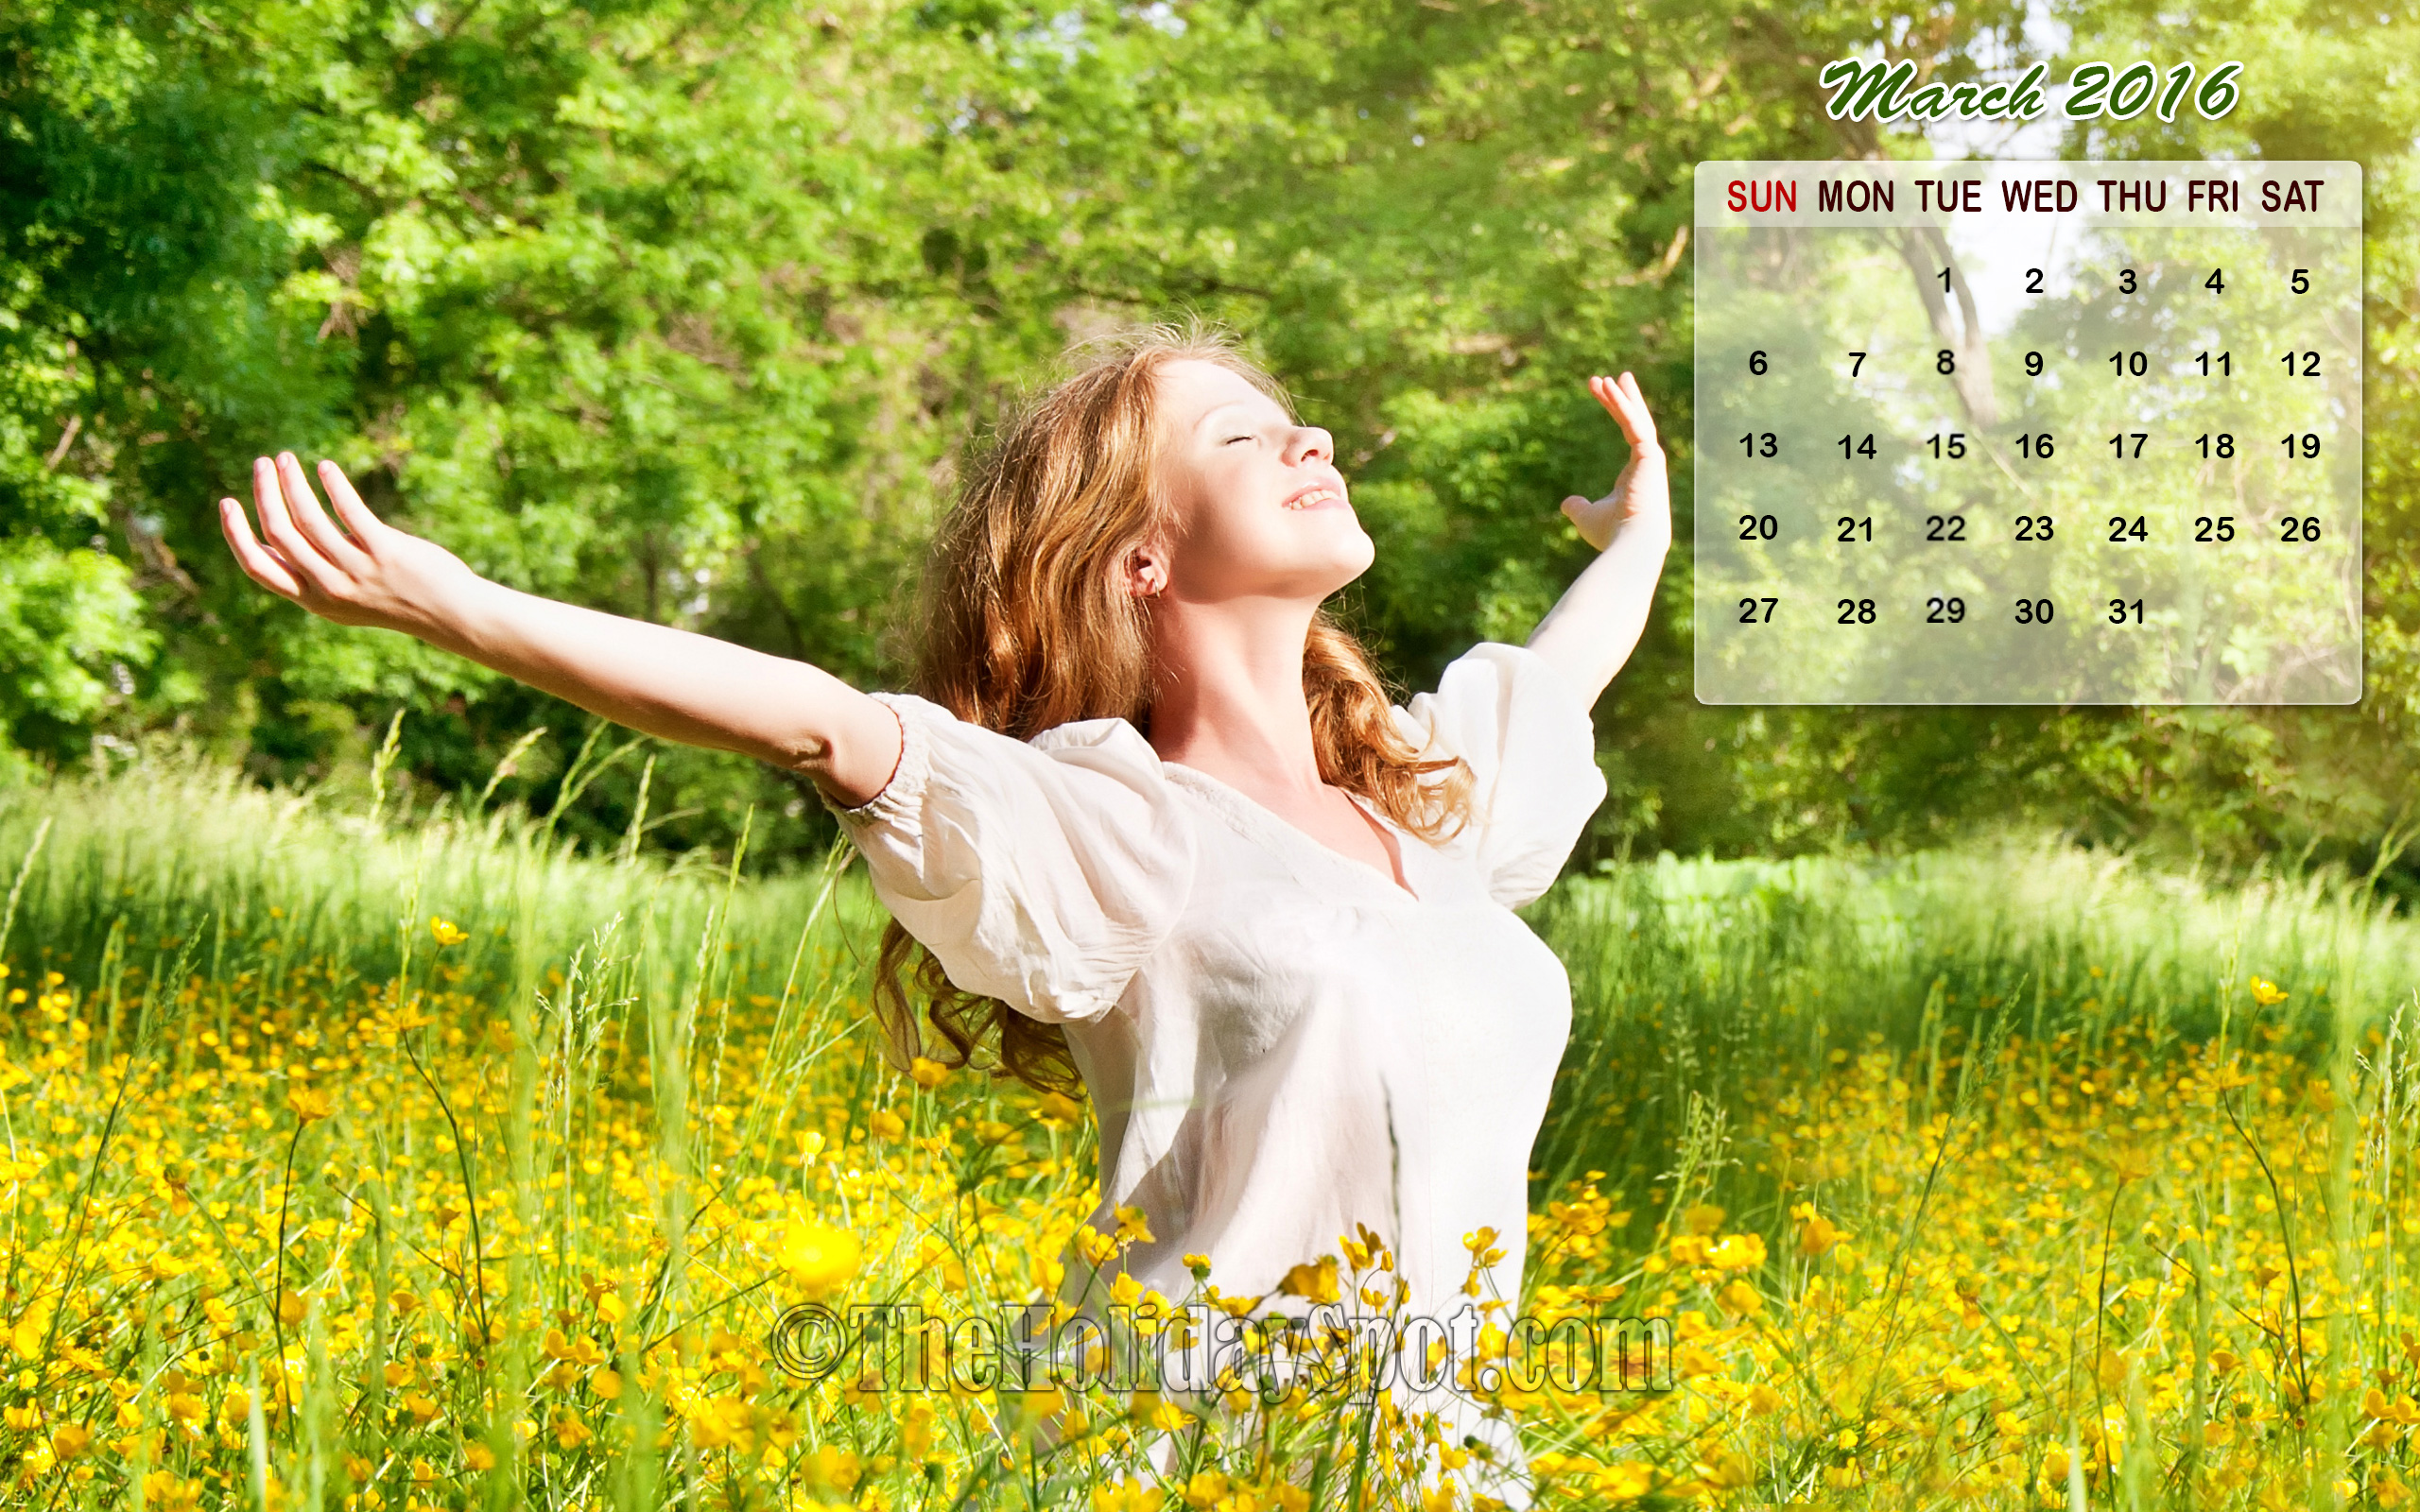 Month wise Calendar Wallpapers for the Whole Year 2560x1600